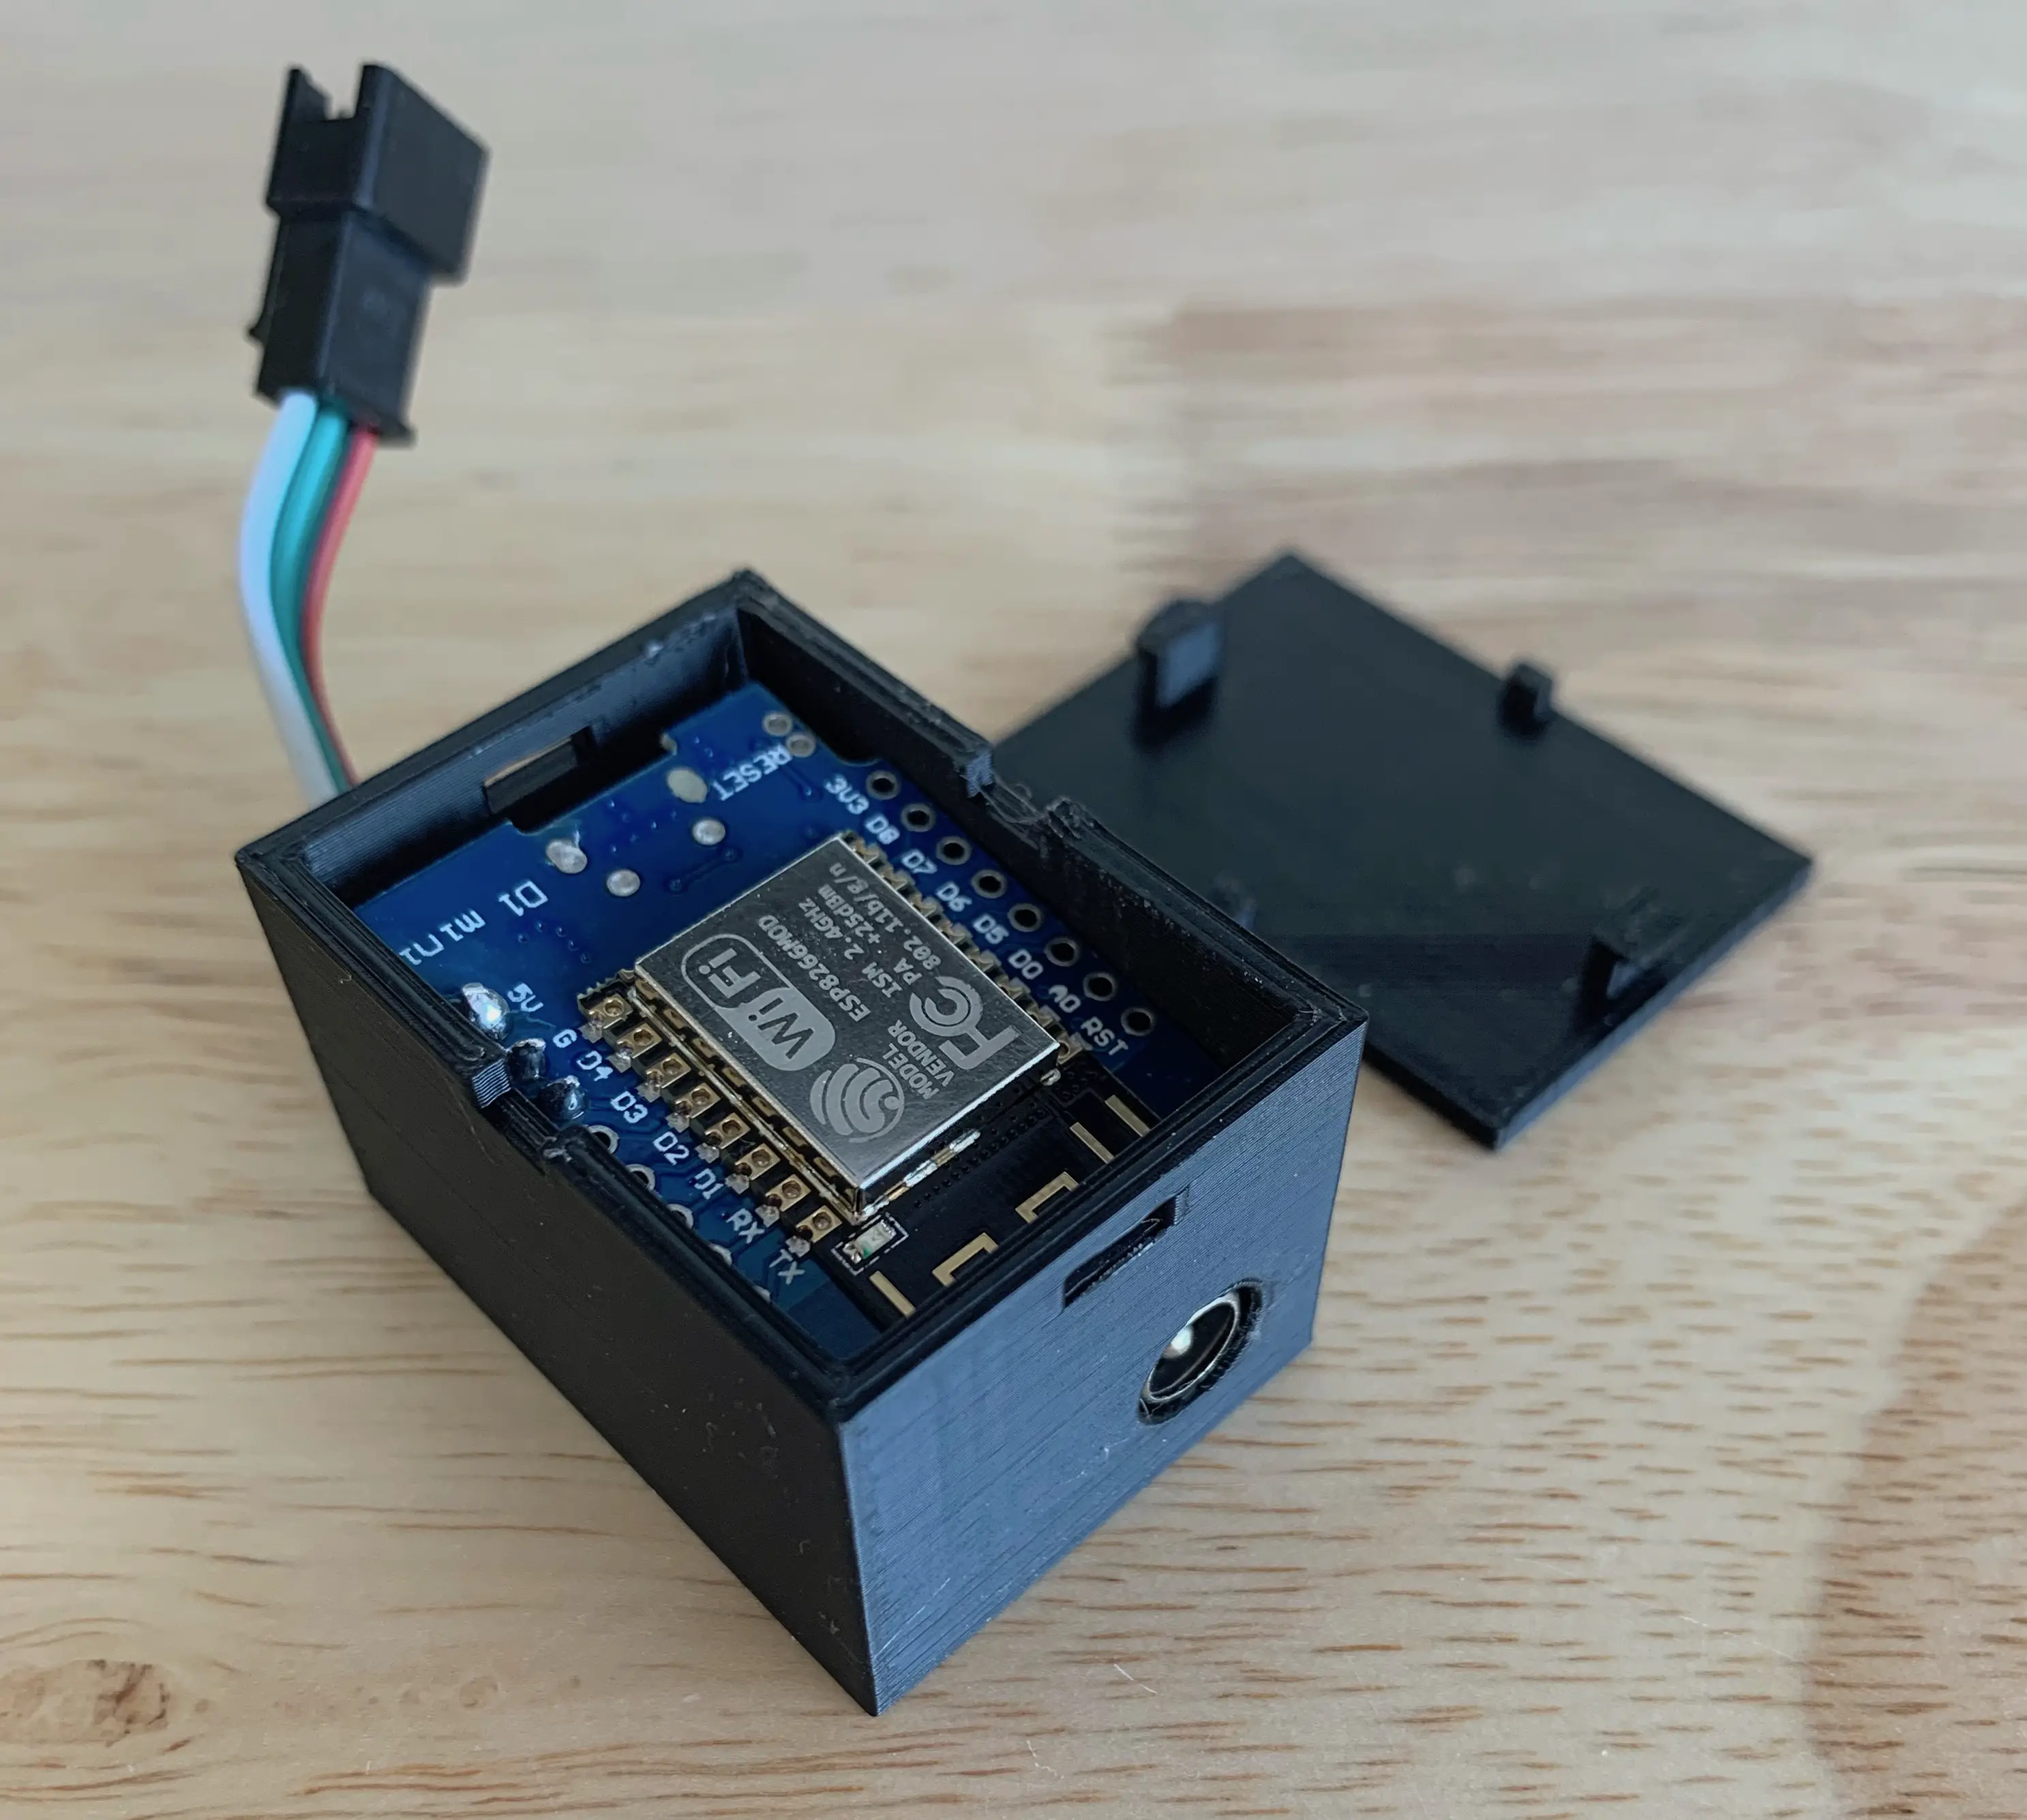 Pre-soldered D1 Mini in 3d printed enclosure with barrel connector power